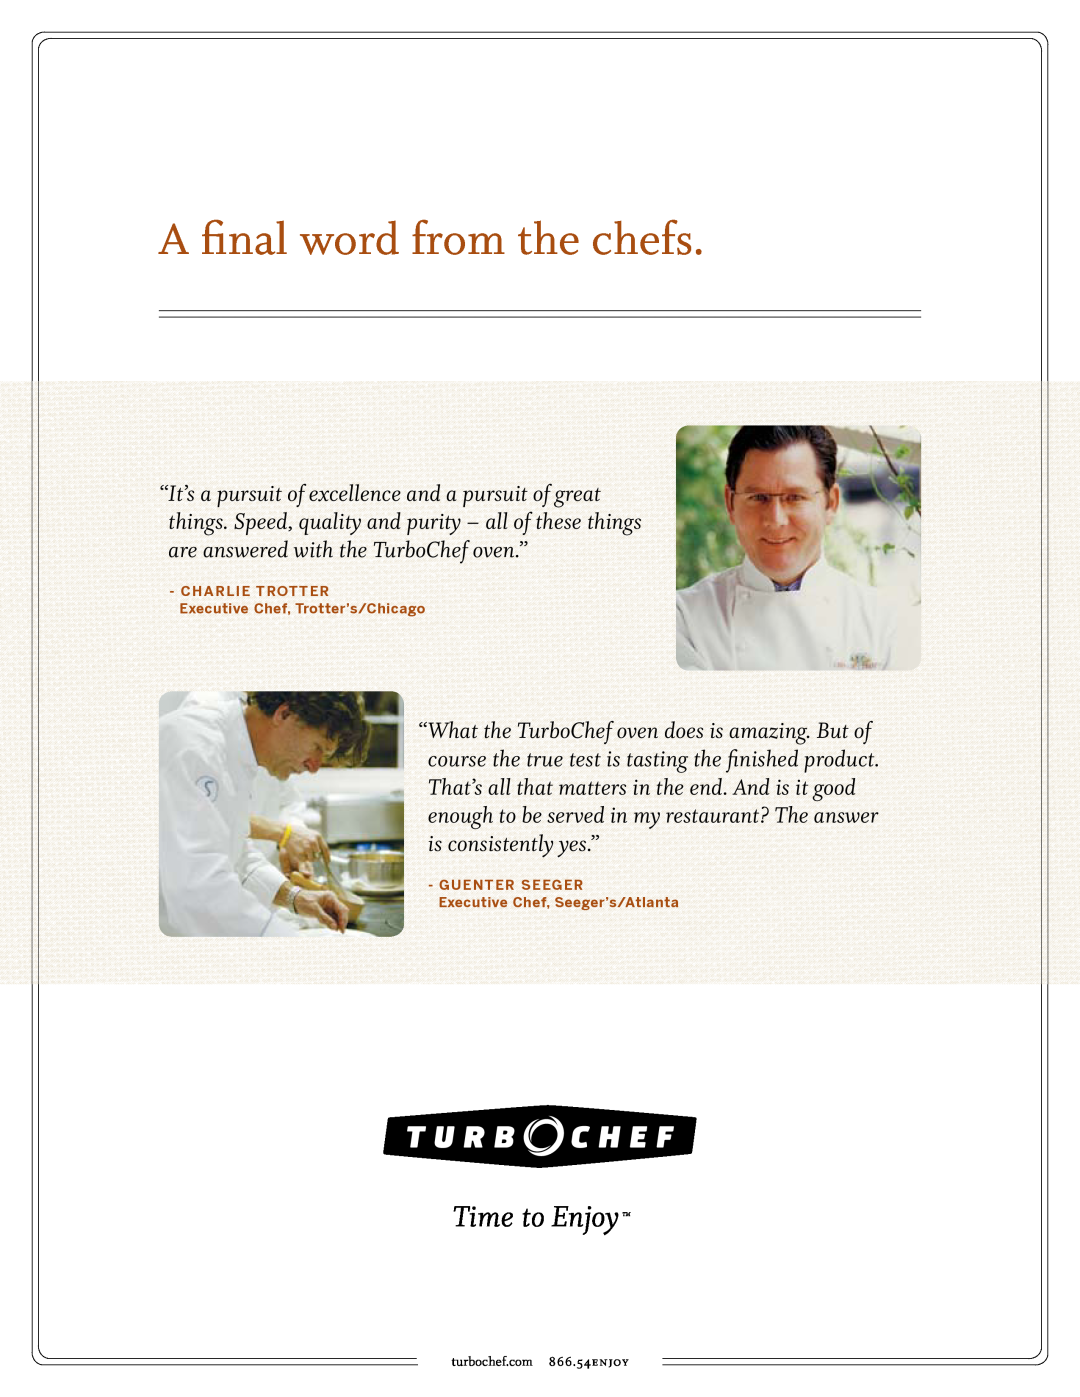 Turbo Chef Technologies TDO30 * 208 manual A final word from the chefs, Charlie Trotter Executive Chef, Trotter’s/Chicago 